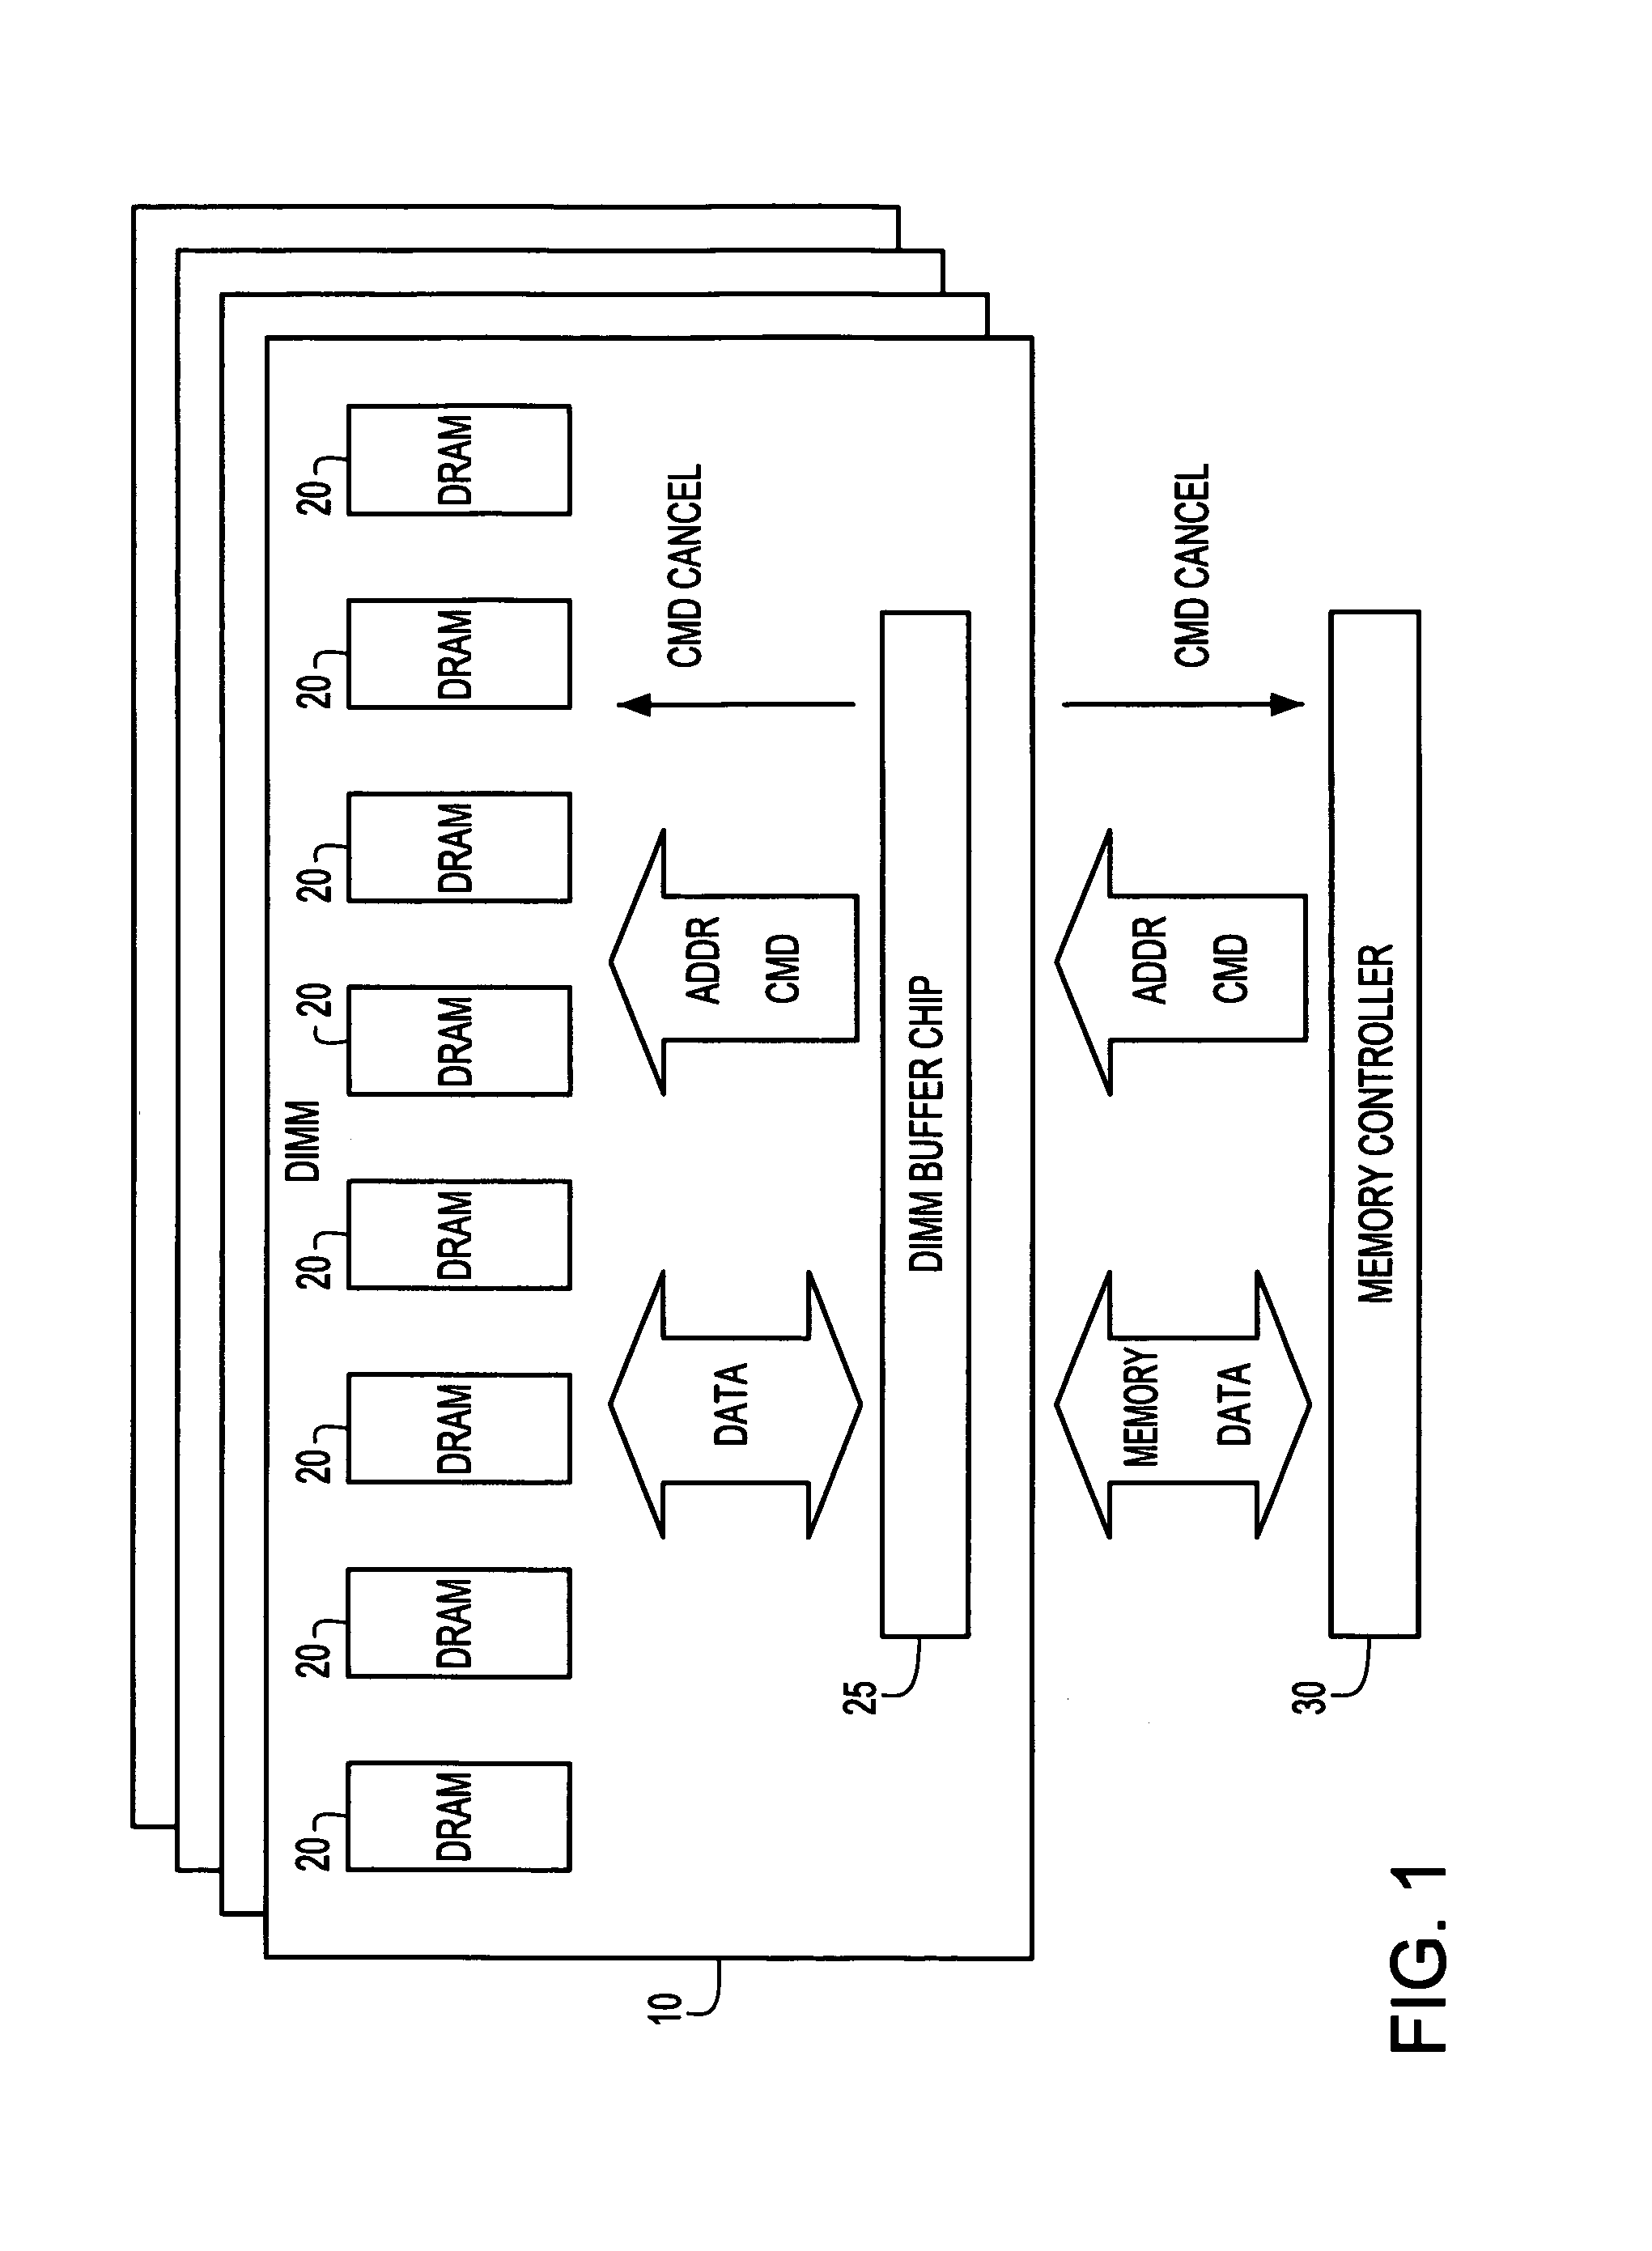 Method for performing a command cancel function in a DRAM